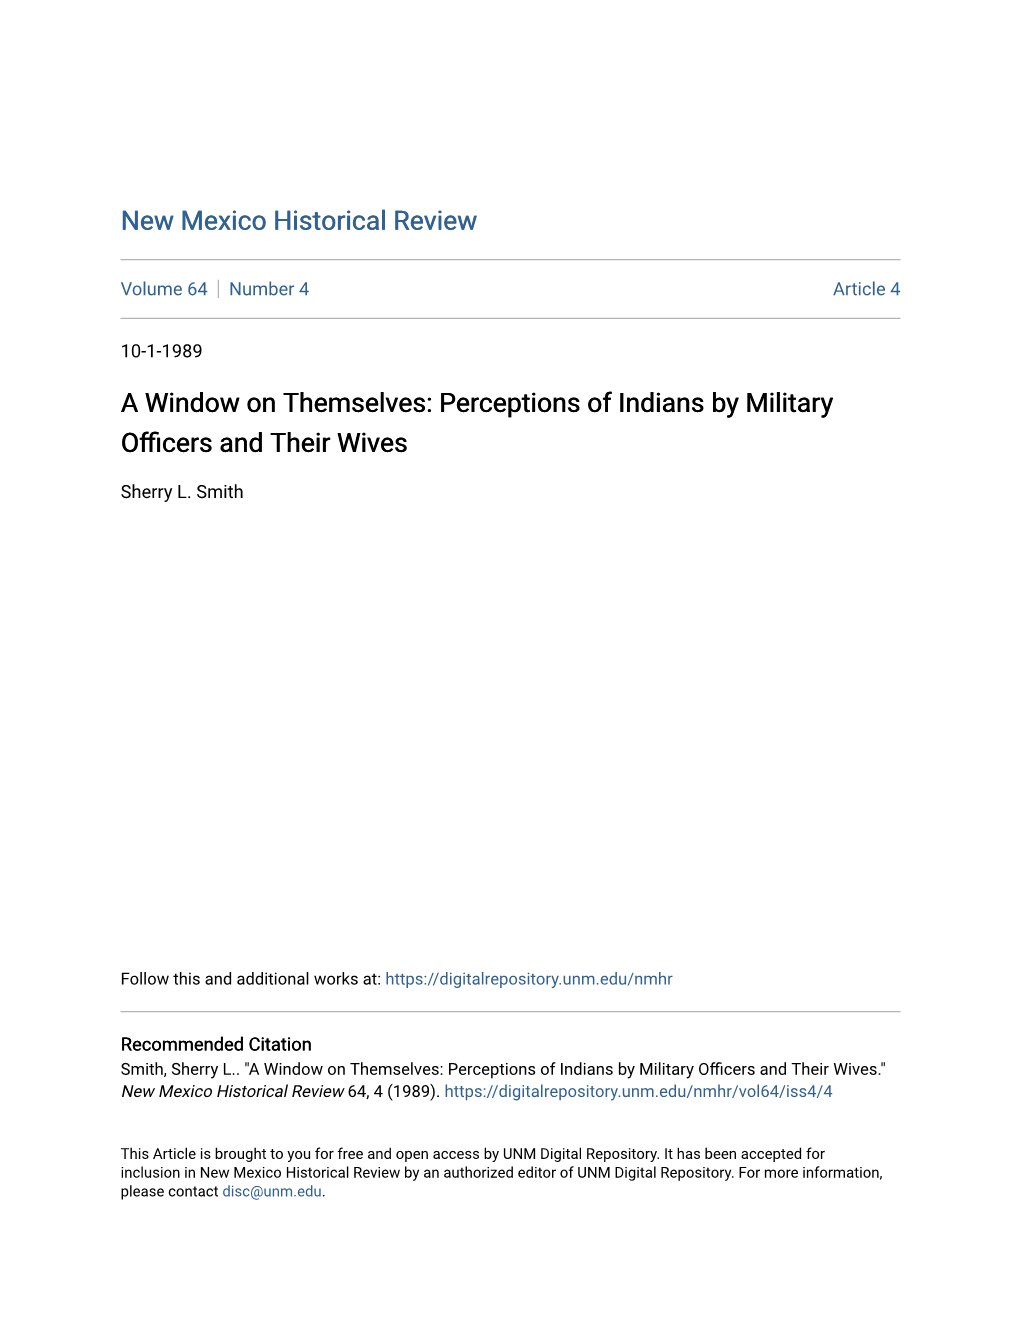 Perceptions of Indians by Military Officers and Their Wives